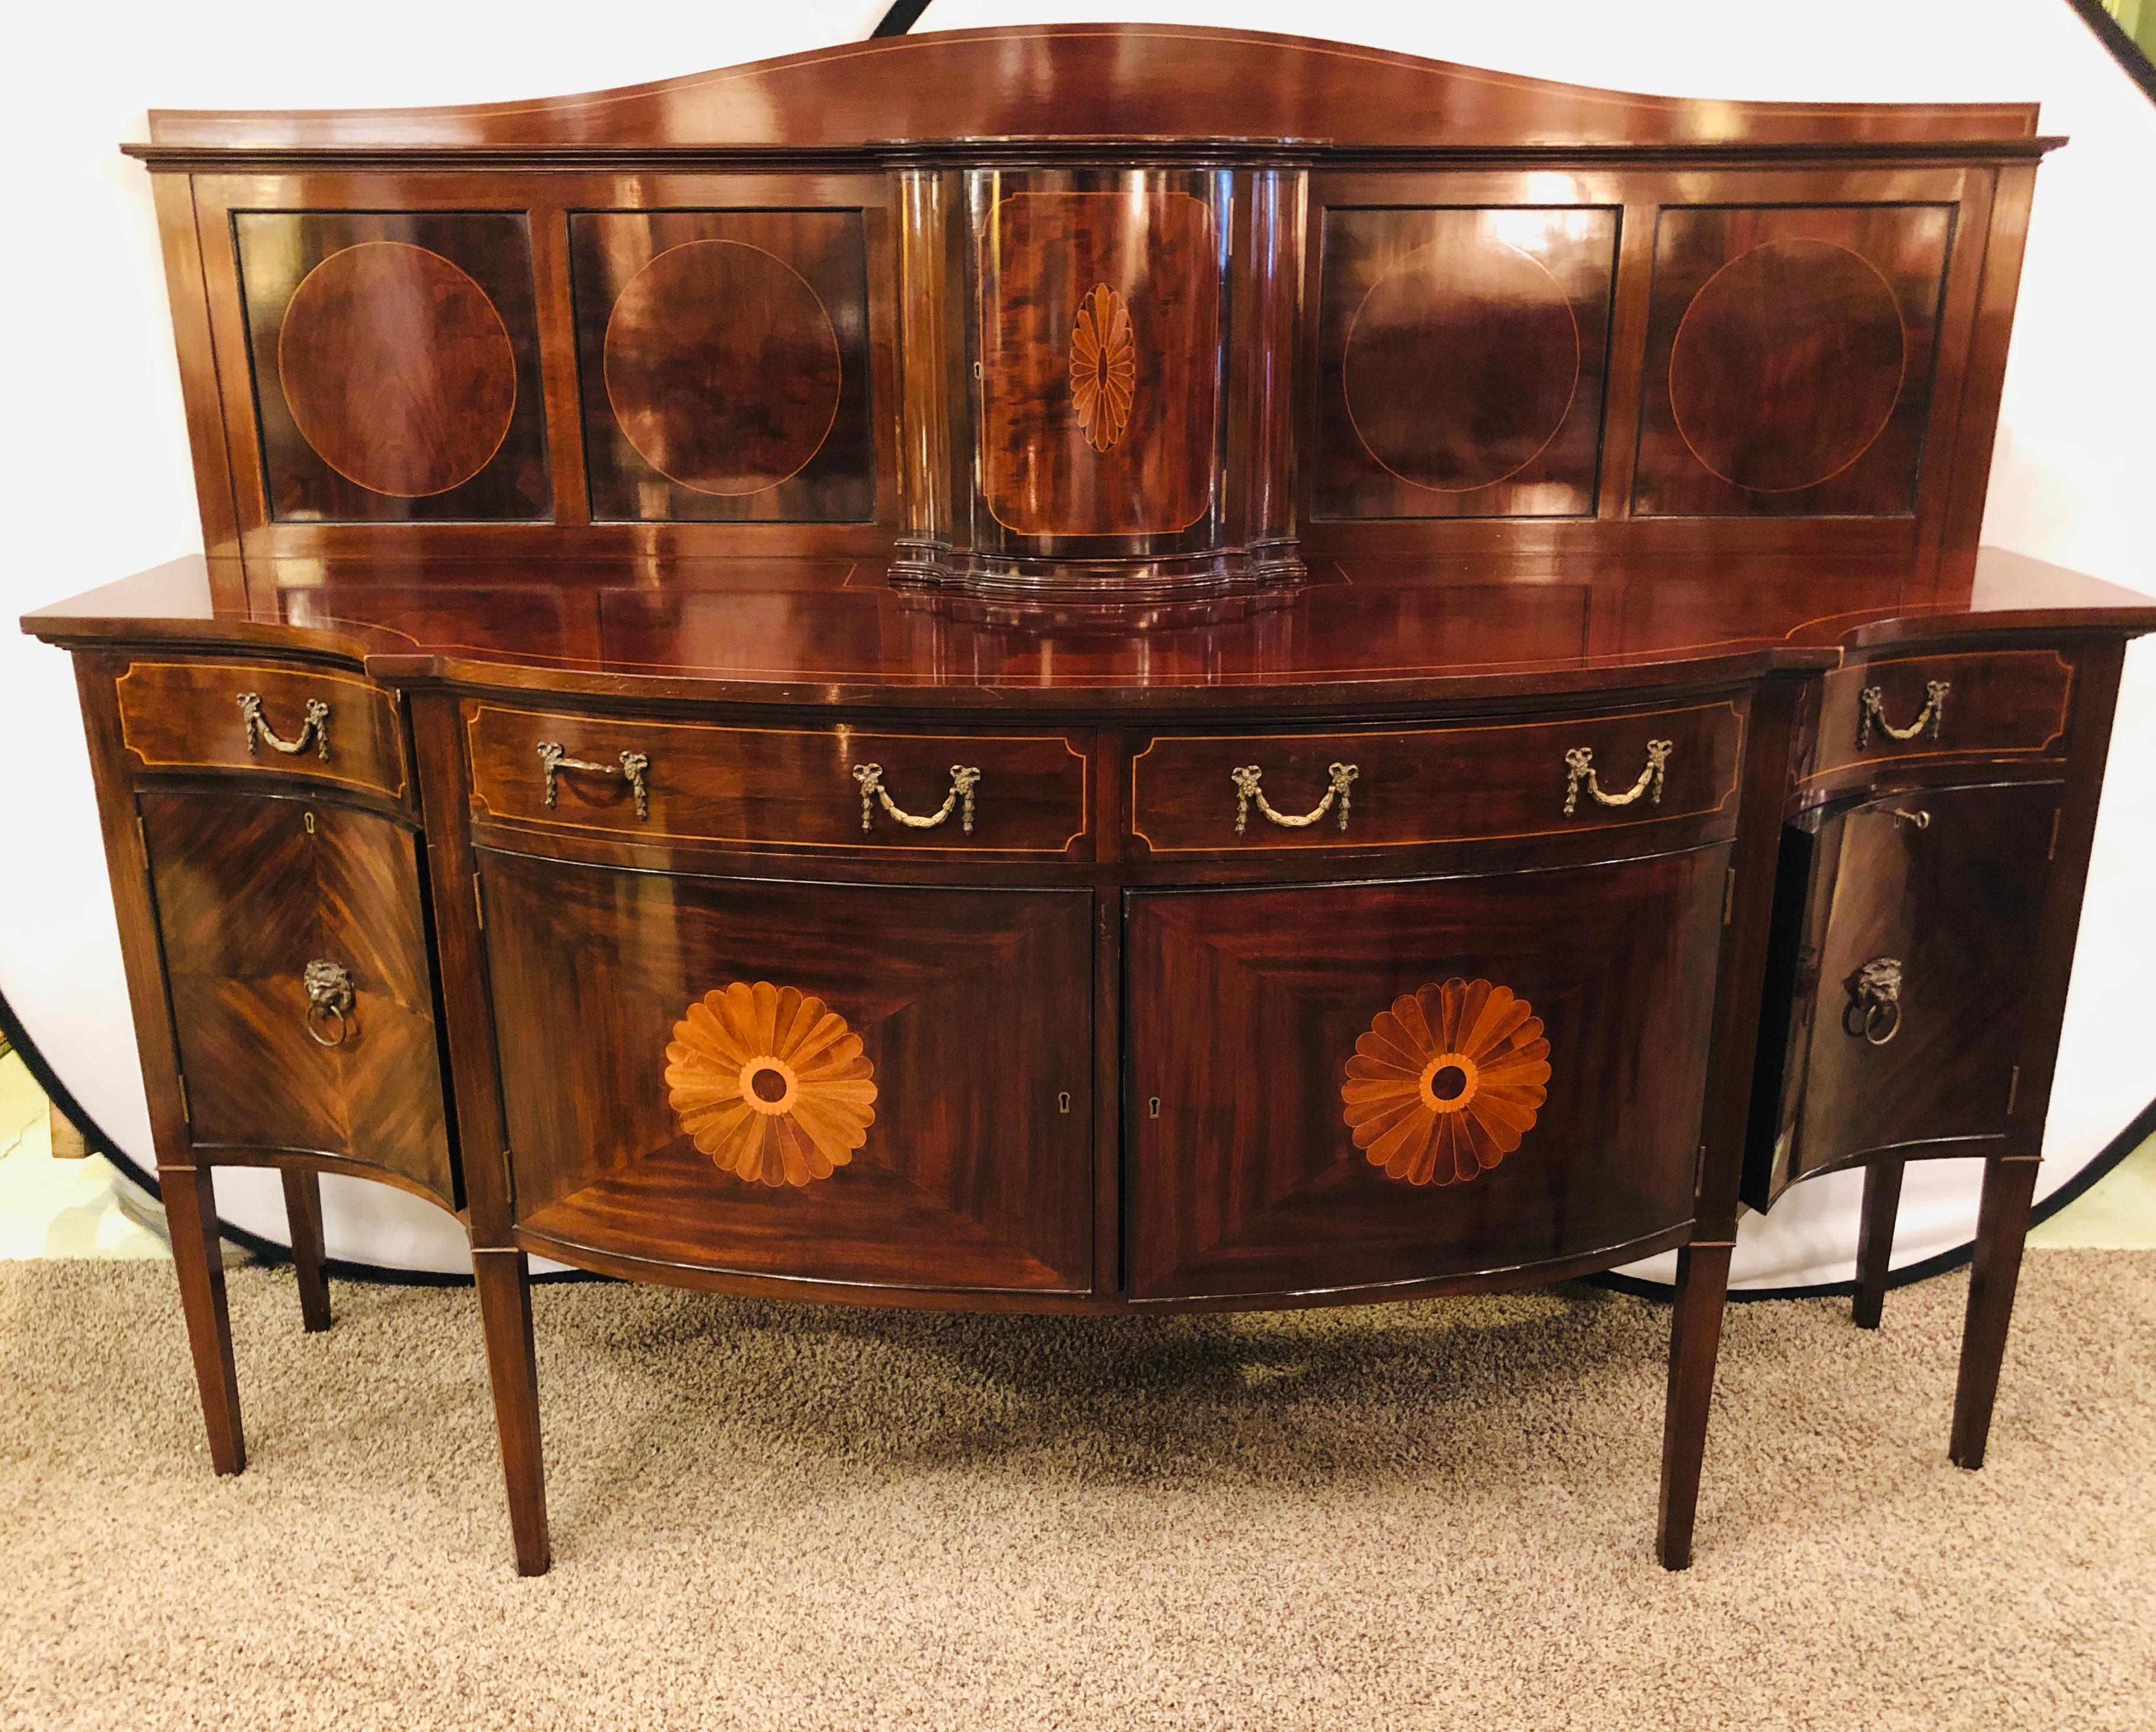 Palatial Thomas Sheraton style flame mahogany 19th century sideboard buffet with inlaid backsplash top. This stunning and spectacular sideboard can be used with or without the finely inlaid showcase backsplash. This seemingly timeless sideboard sits